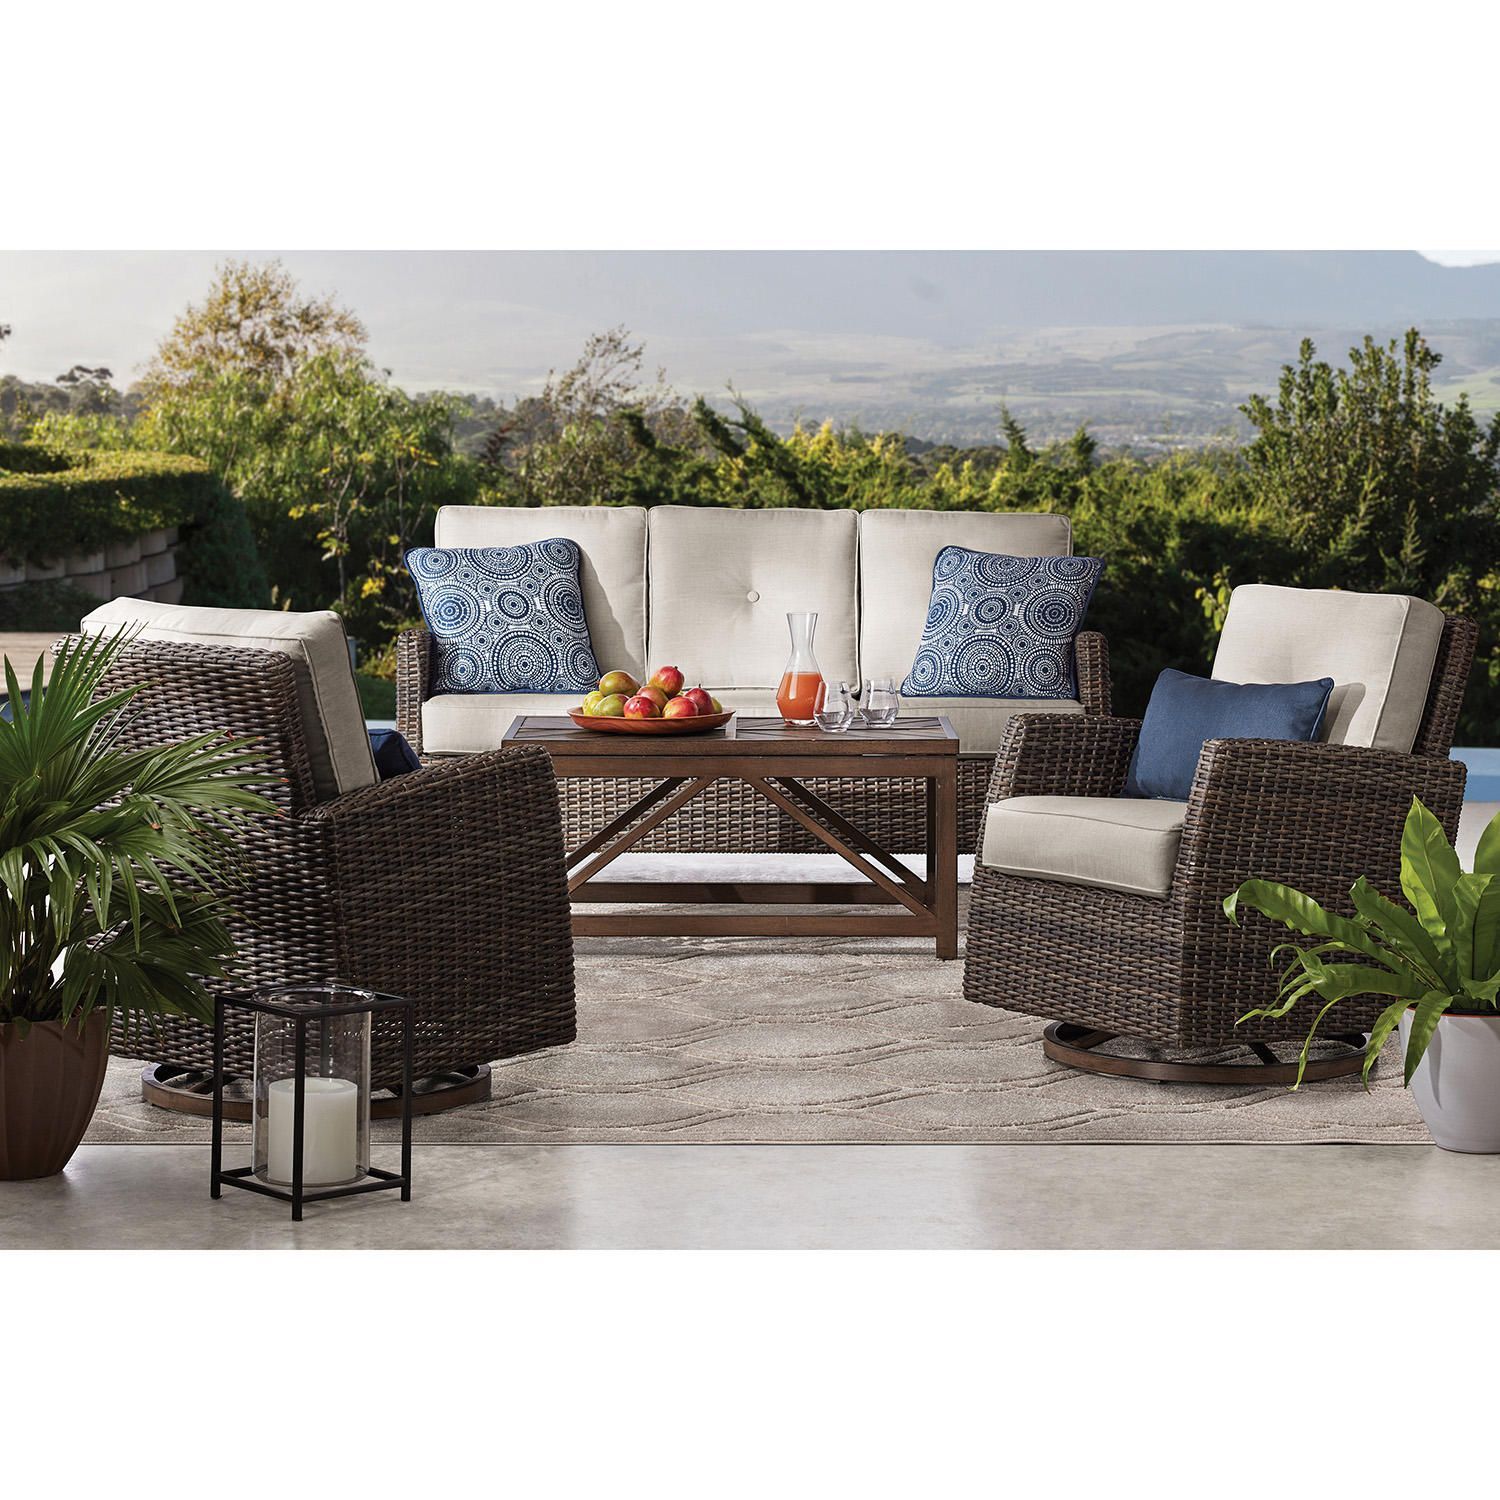 Member'S Mark Agio Fremont 4 Piece Patio Deep Seating Set With With 4 Piece Outdoor Seating Patio Sets (View 10 of 15)